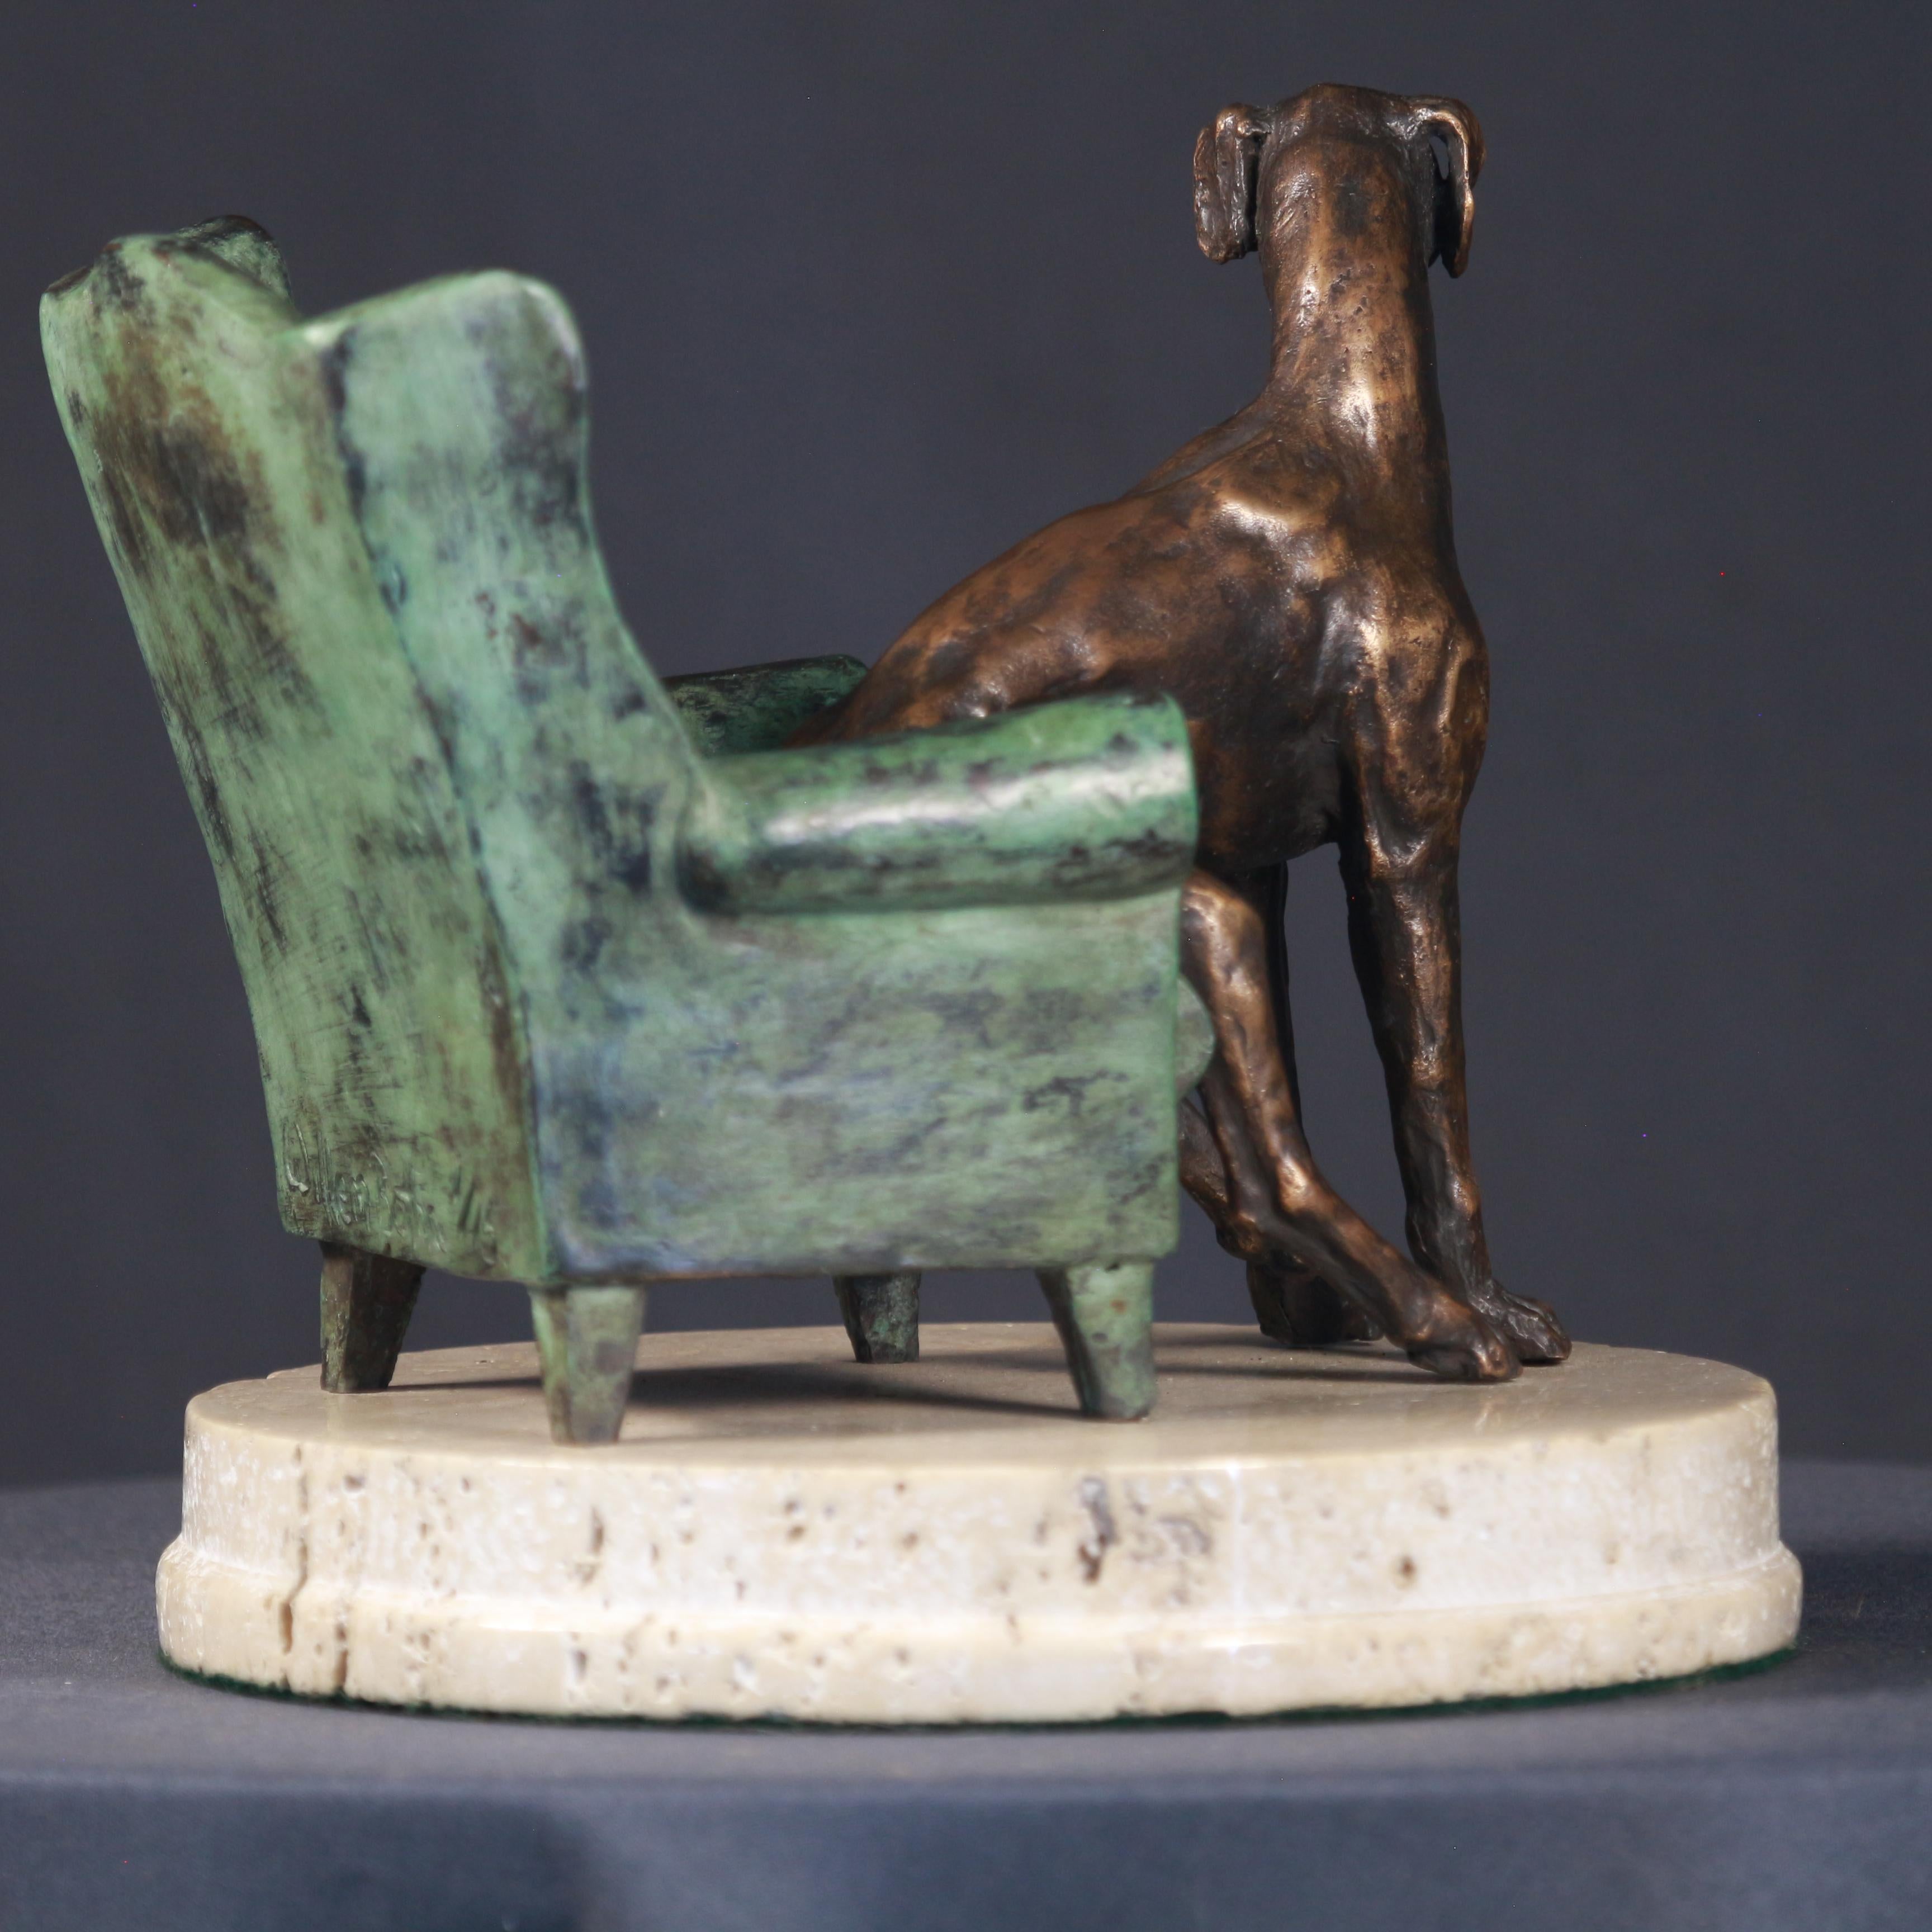 Rex and his Chair- Small Sculpture Bronze Colors Brown Green Dash Black Patina - Gold Figurative Sculpture by Willem Botha 